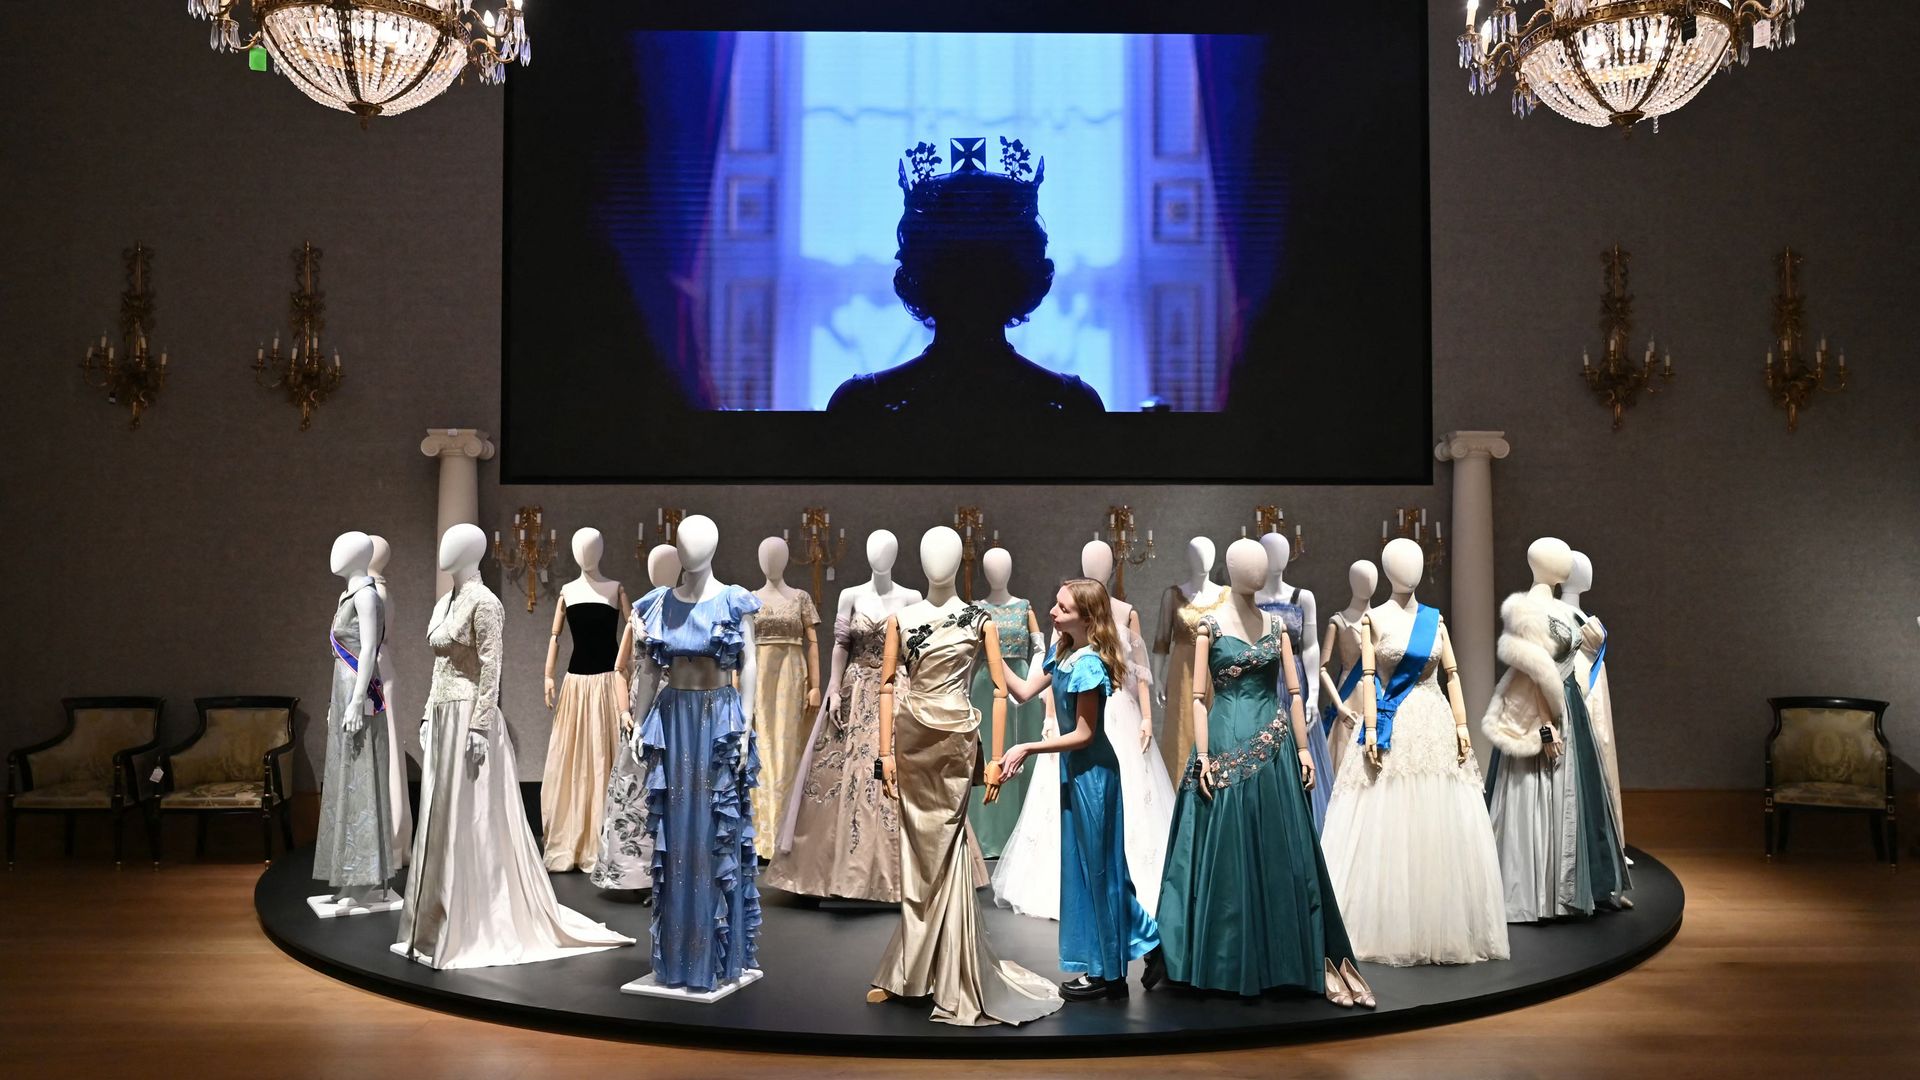 TOPSHOT - Costumes are pictured during a photocall for an exhibition of props for items used in the filming of the Netflix series 'The Crown', at Bonhams auctioneers in London on January 9, 2024, ahead of an auction of the items. The Exhibition, ahead of Bonhams' 'The Crown Auction', is set to run from January 11 until February 5, with the auction set to take place on February 7. (Photo by JUSTIN TALLIS / AFP) (Photo by JUSTIN TALLIS/AFP via Getty Images)